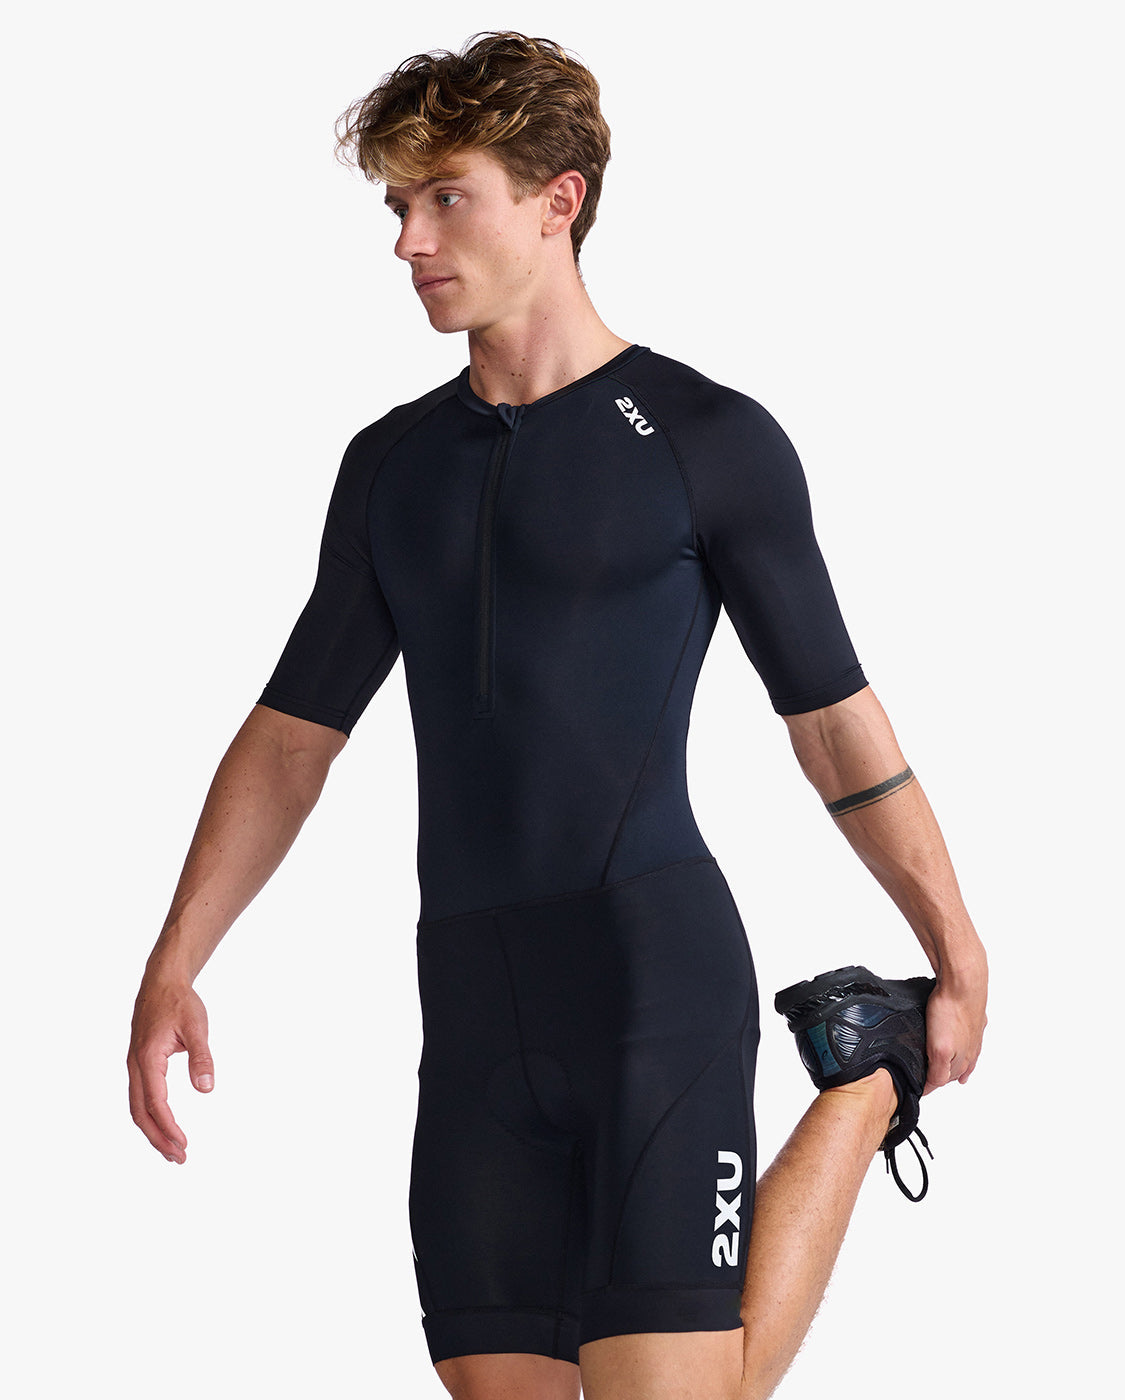 Core Sleeved Trisuit